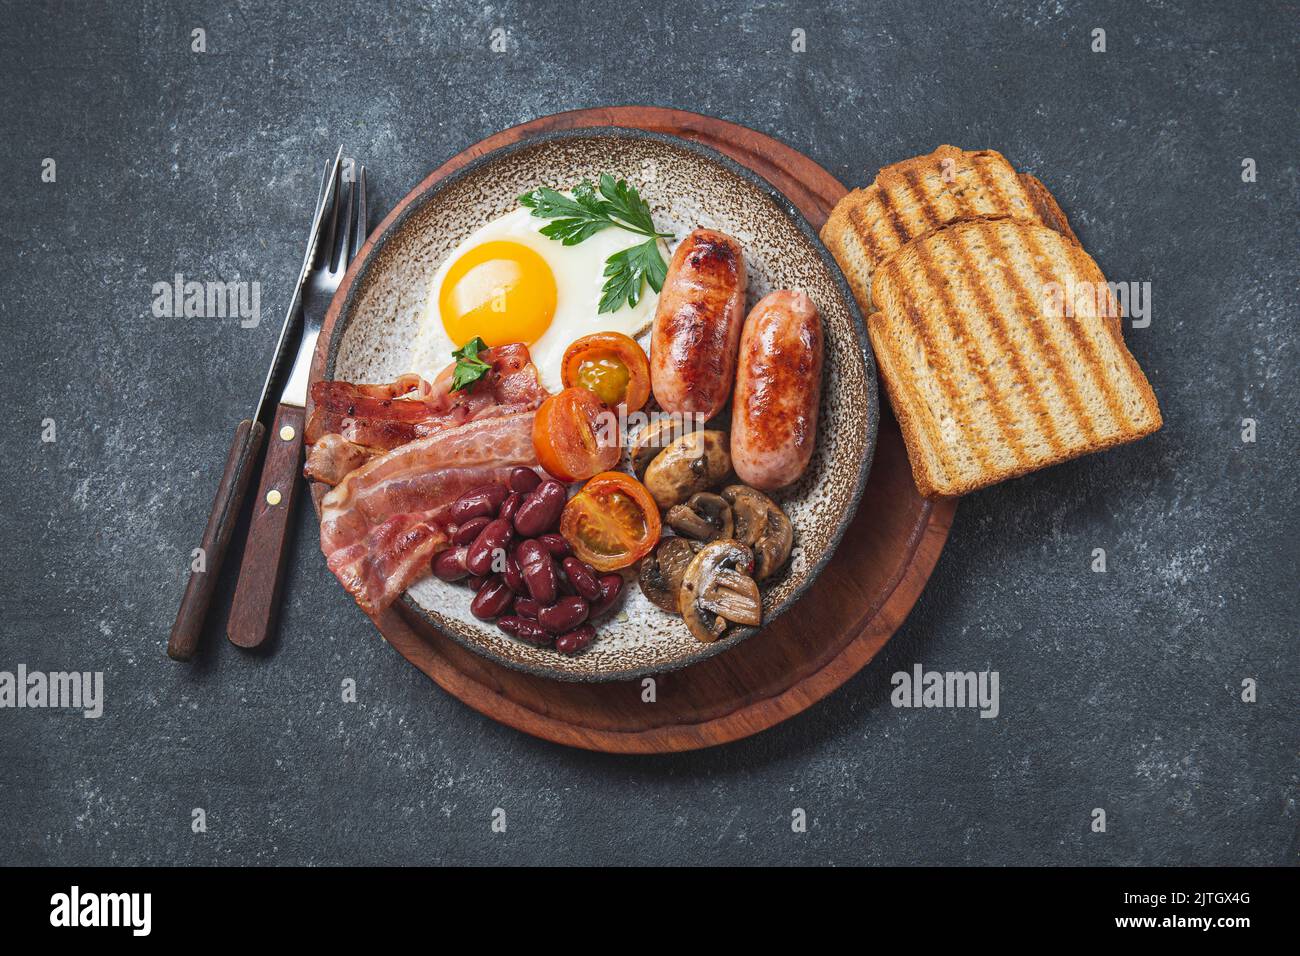 Traditional full English breakfast with fried eggs, sausages, beans, mushrooms, grilled tomatoes, bacon and toasts on gray plates Stock Photo